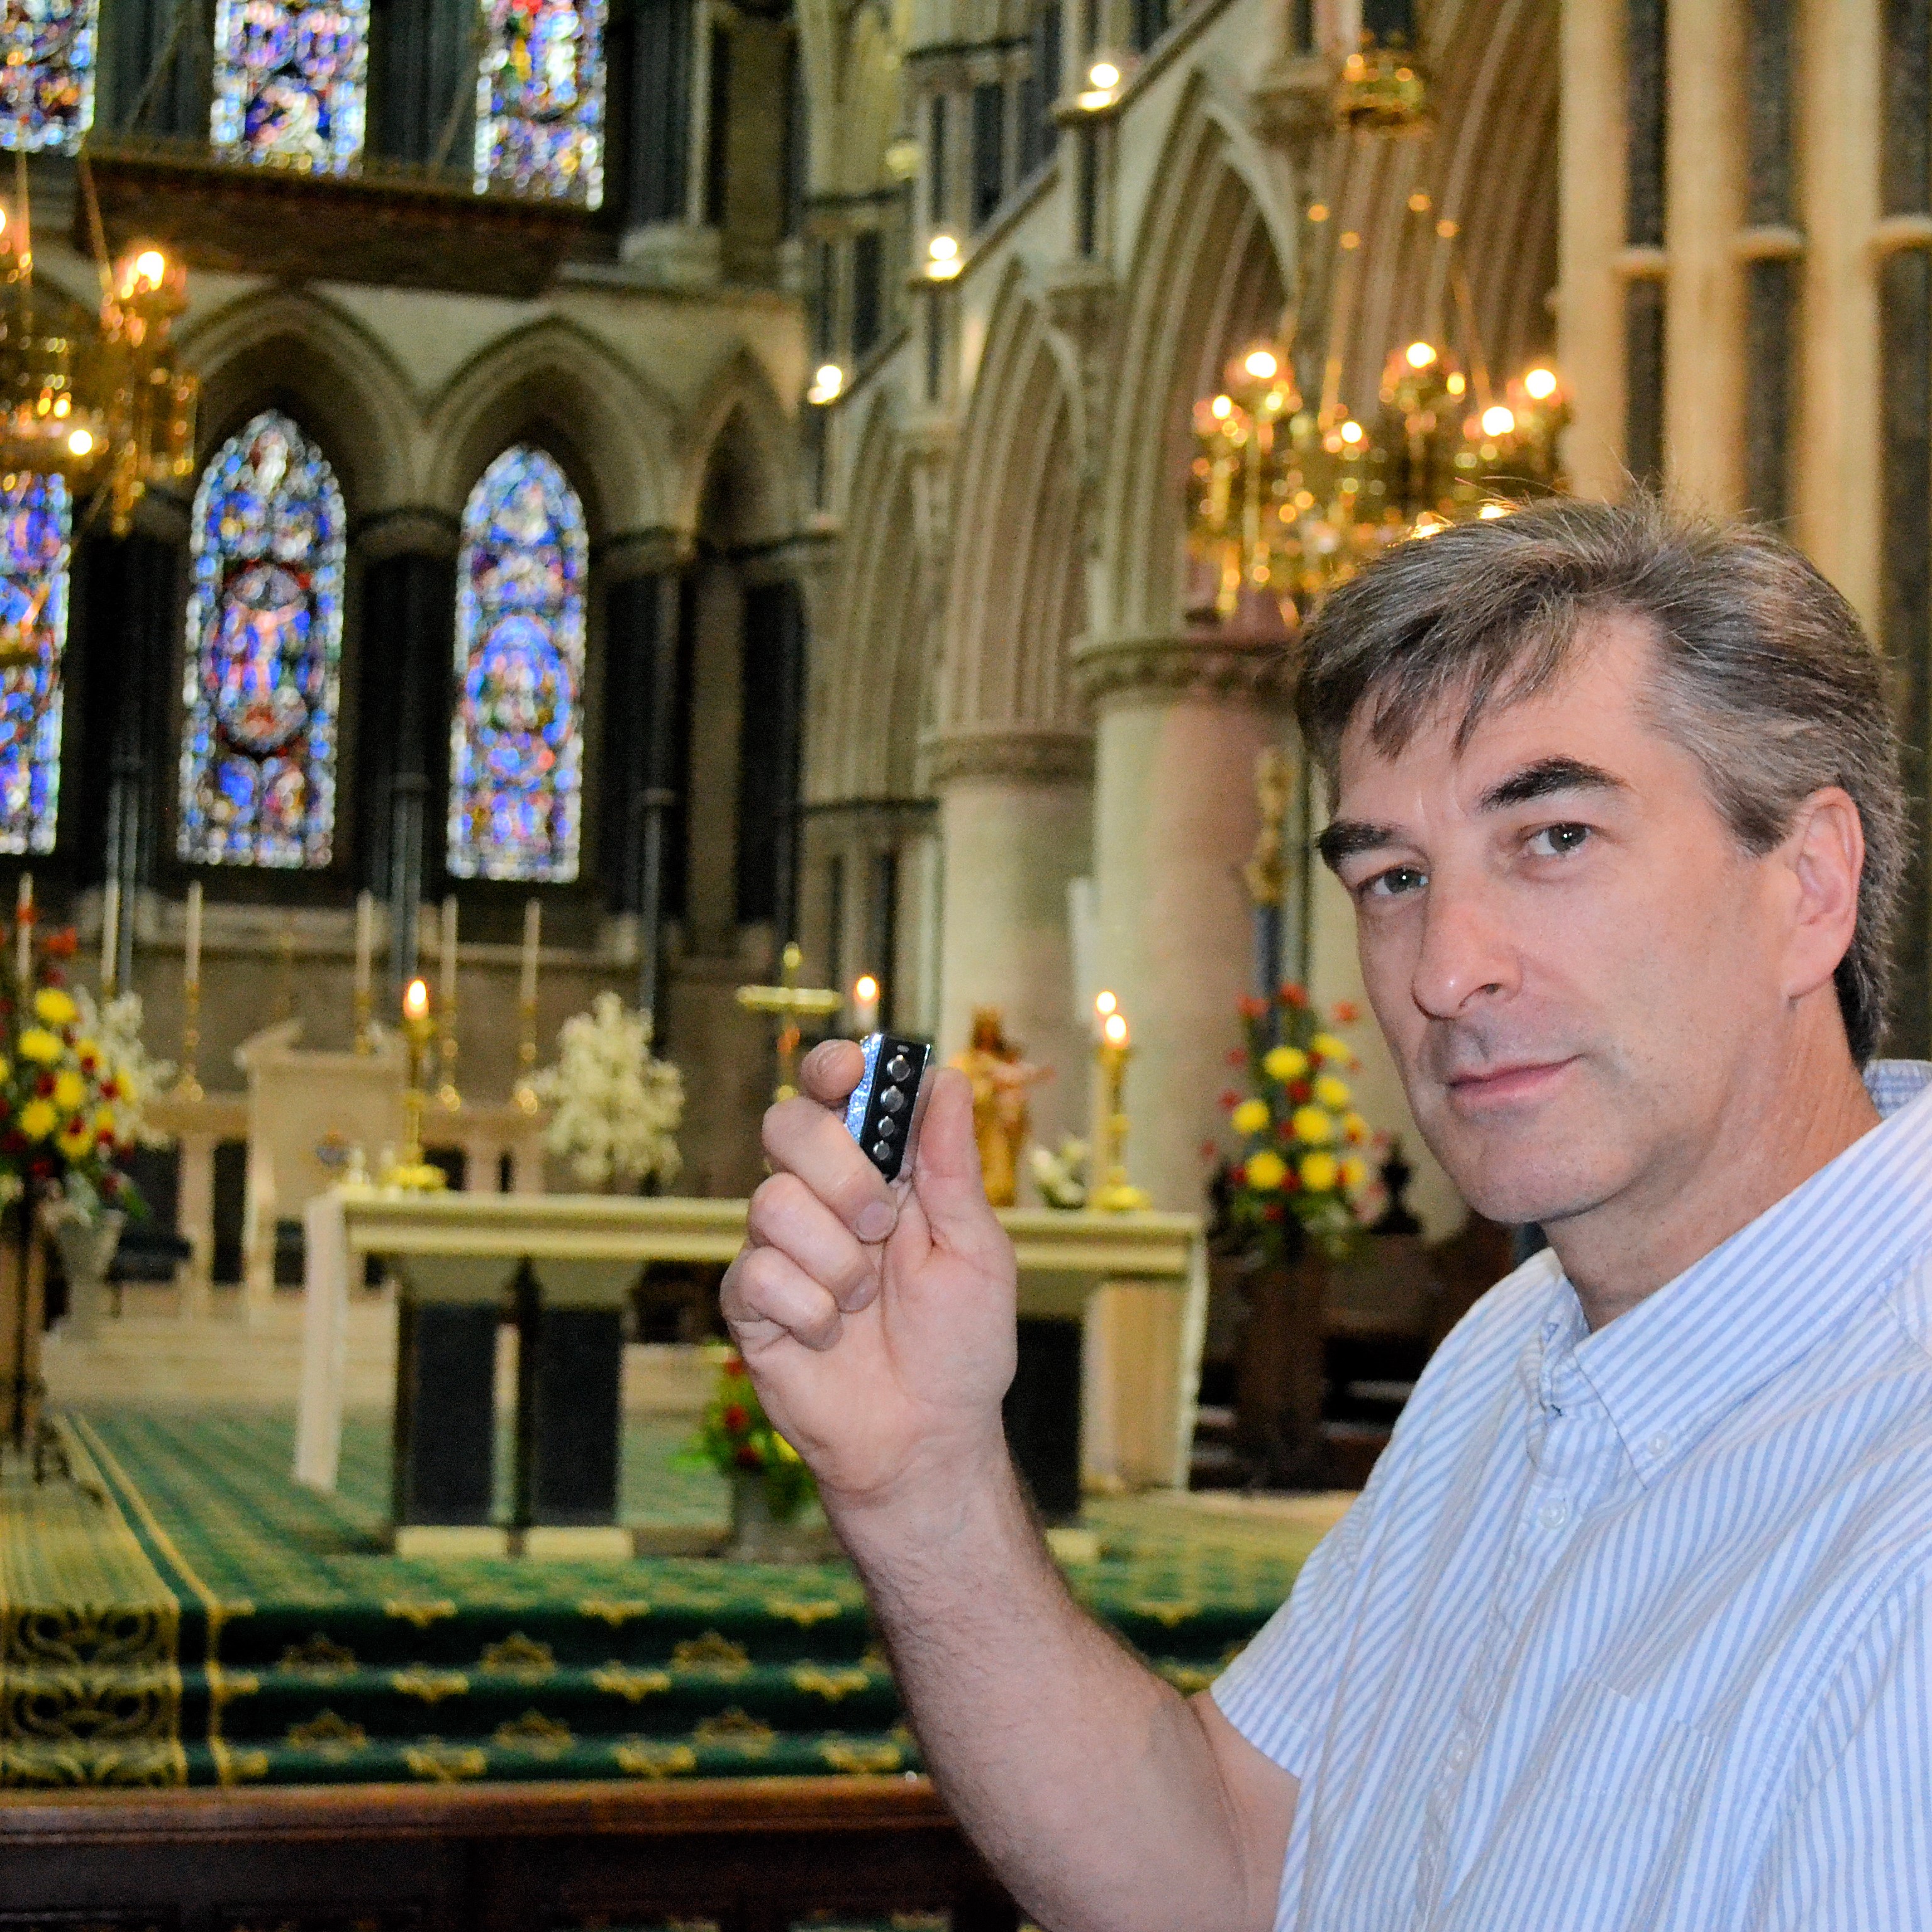 The 'new normal' at St John's Cathedral